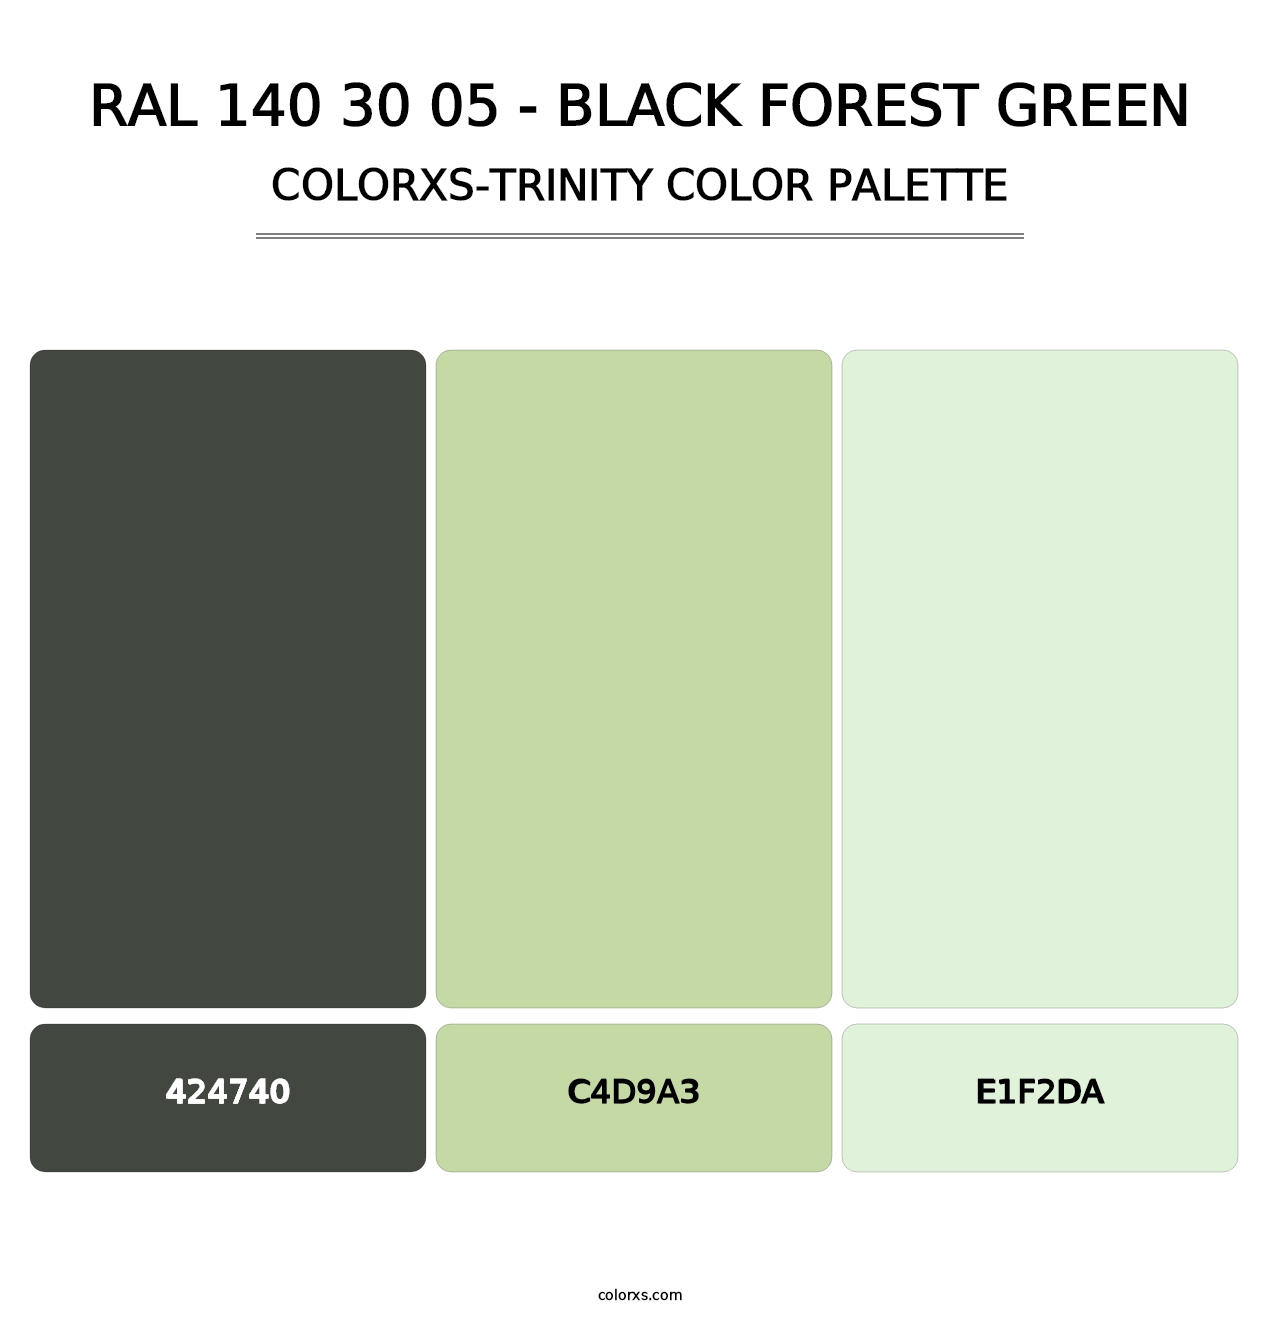 RAL 140 30 05 - Black Forest Green - Colorxs Trinity Palette